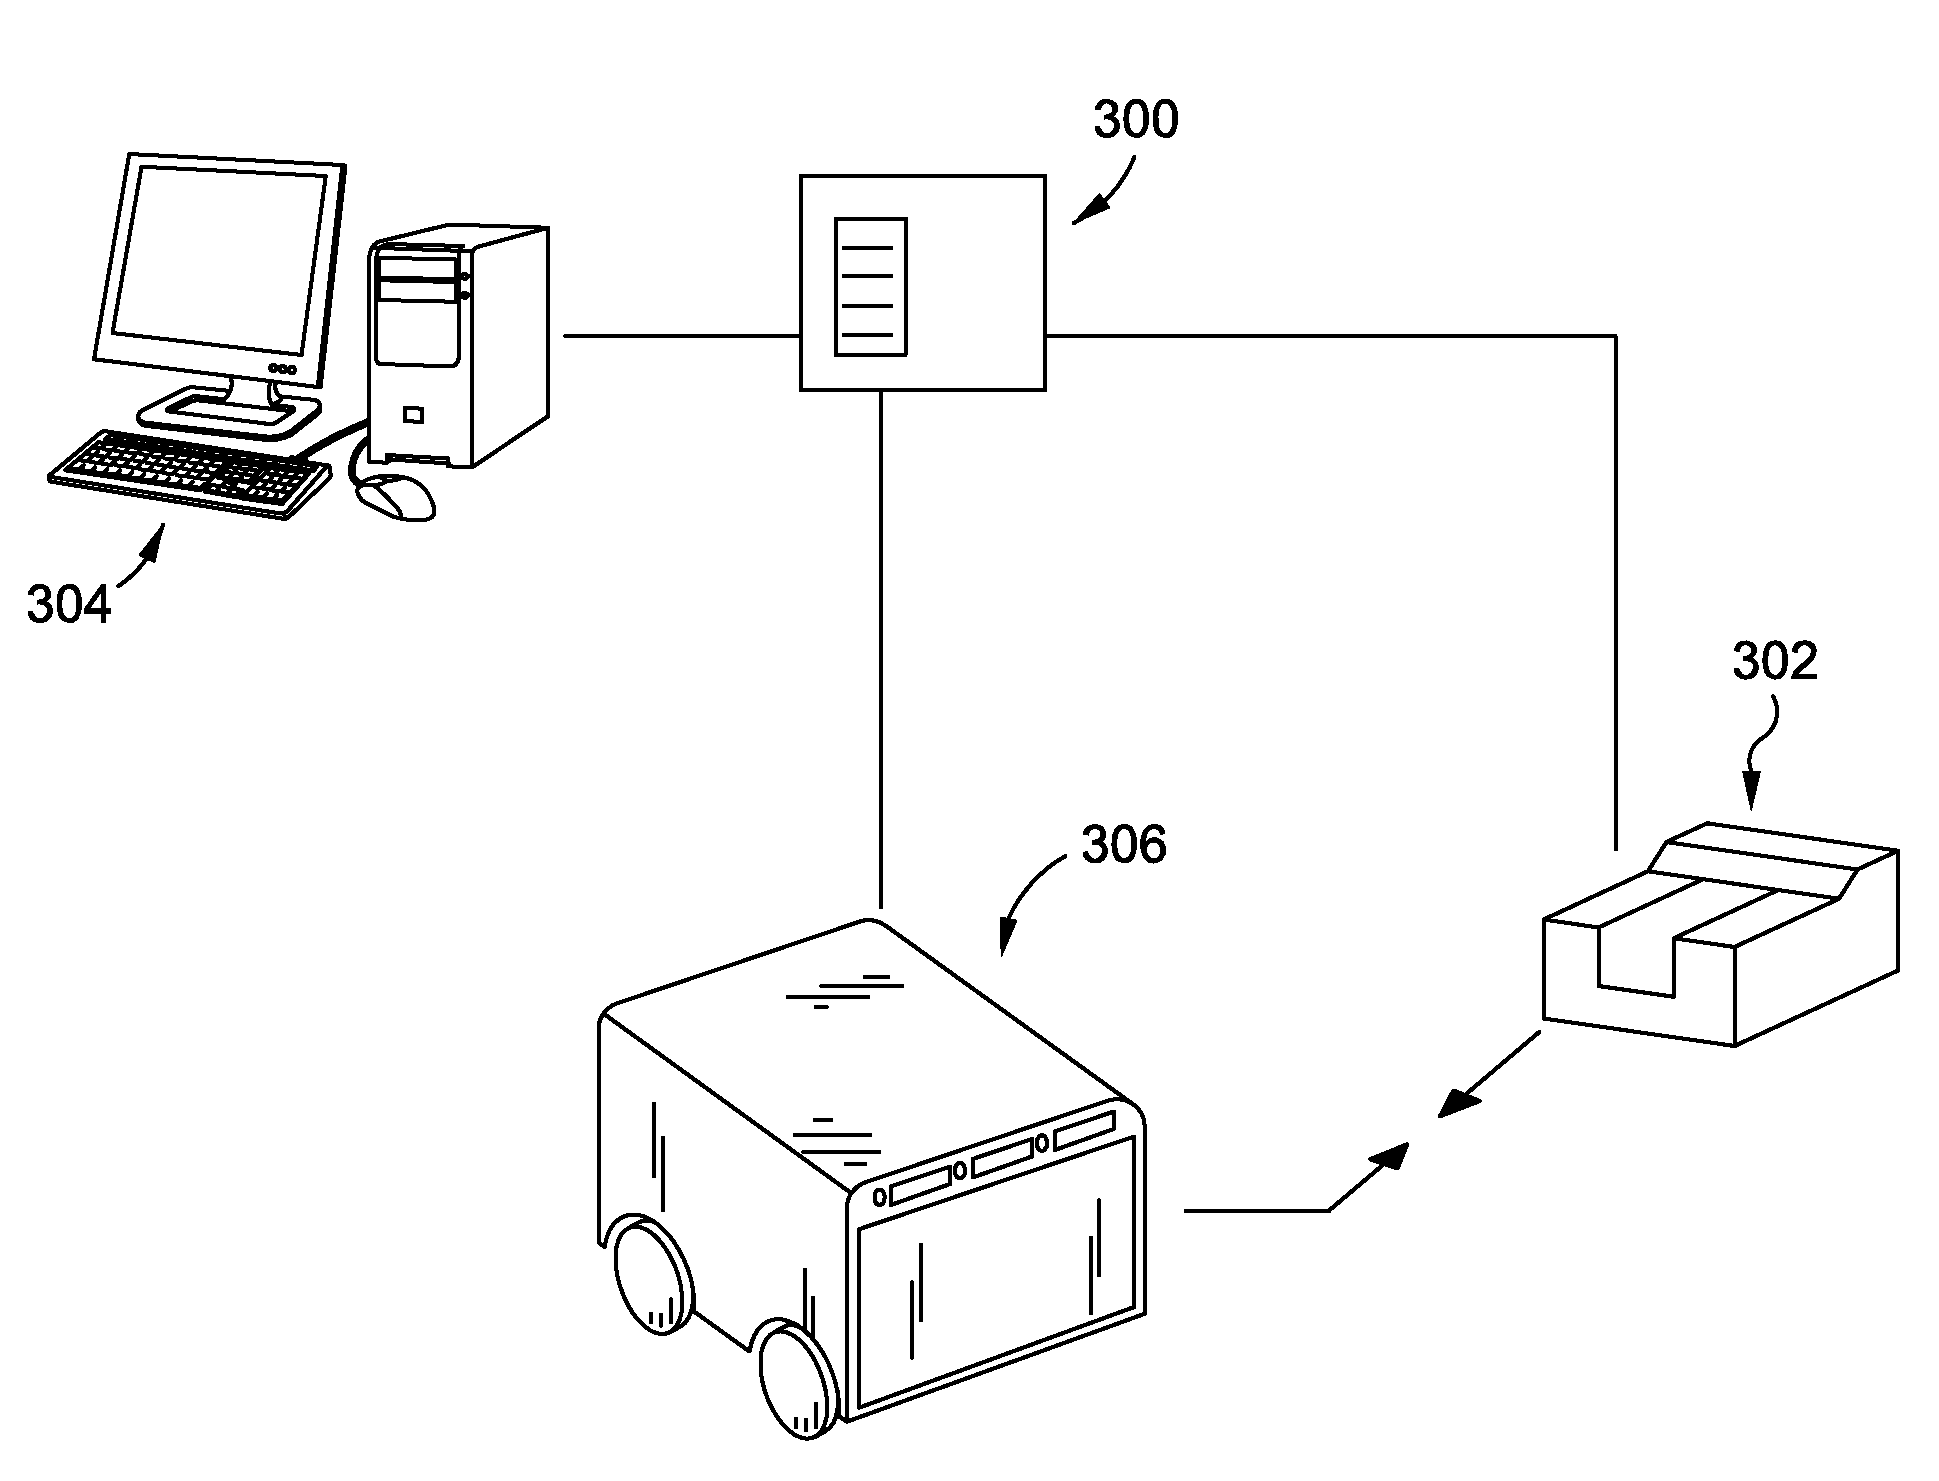 Automated intravenous fluid container delivery device and system